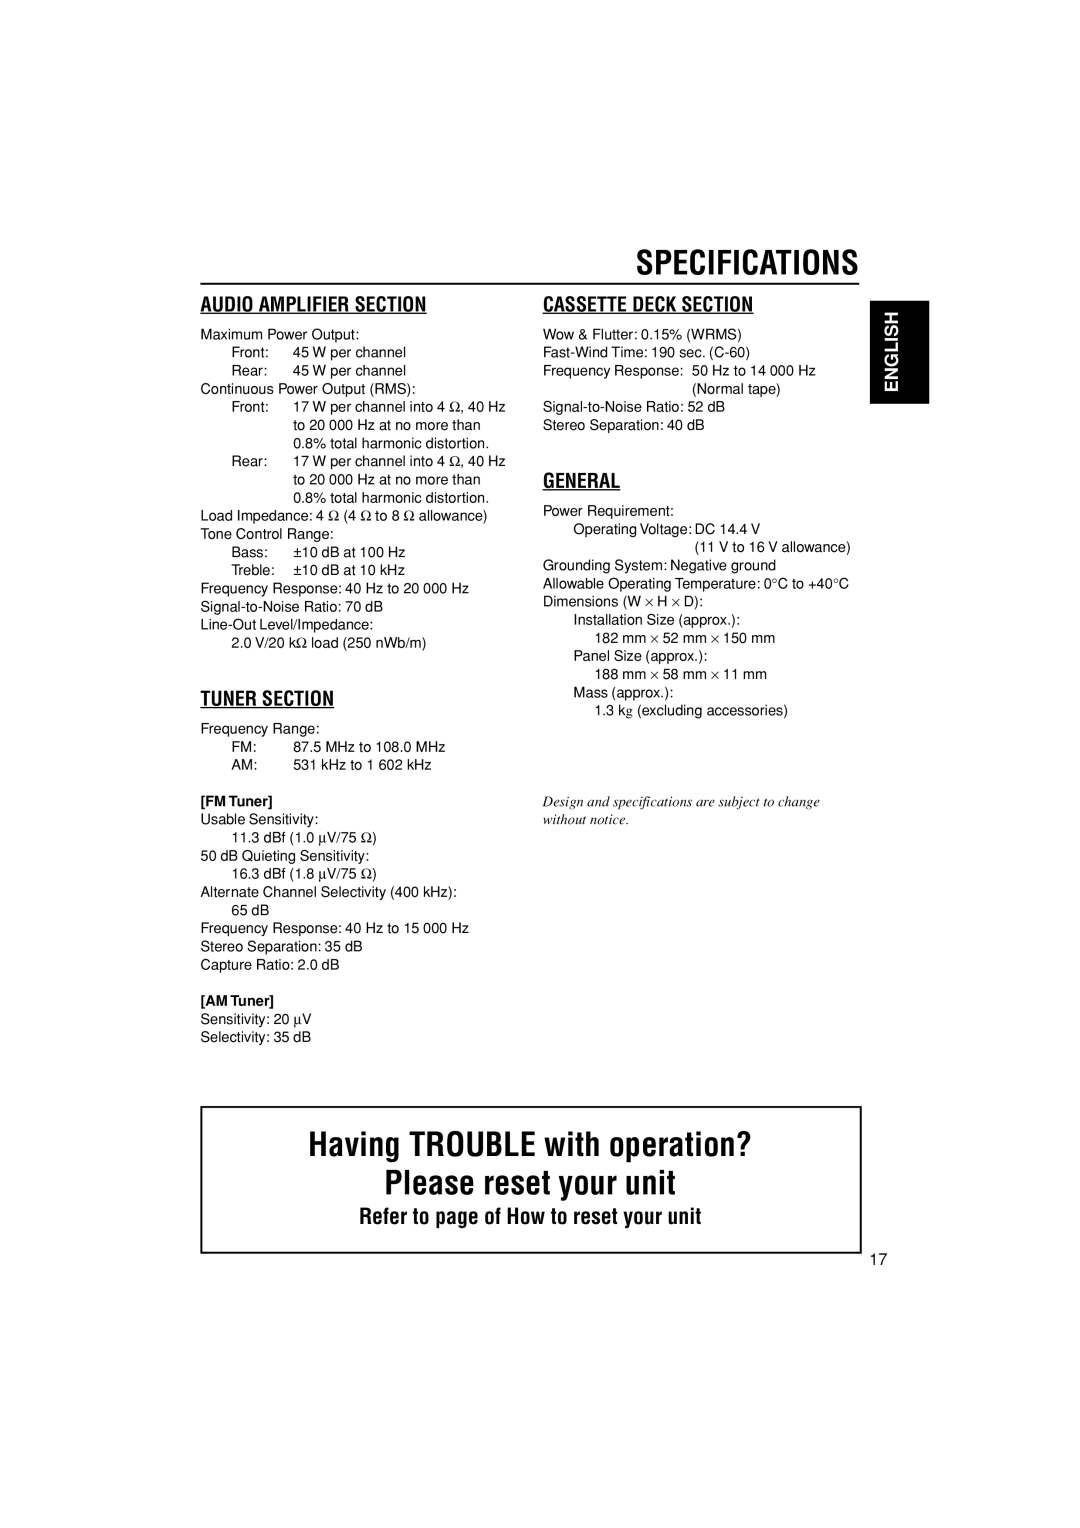 JVC KS-FX385 Specifications, Having TROUBLE with operation? Please reset your unit, Audio Amplifier Section, Tuner Section 